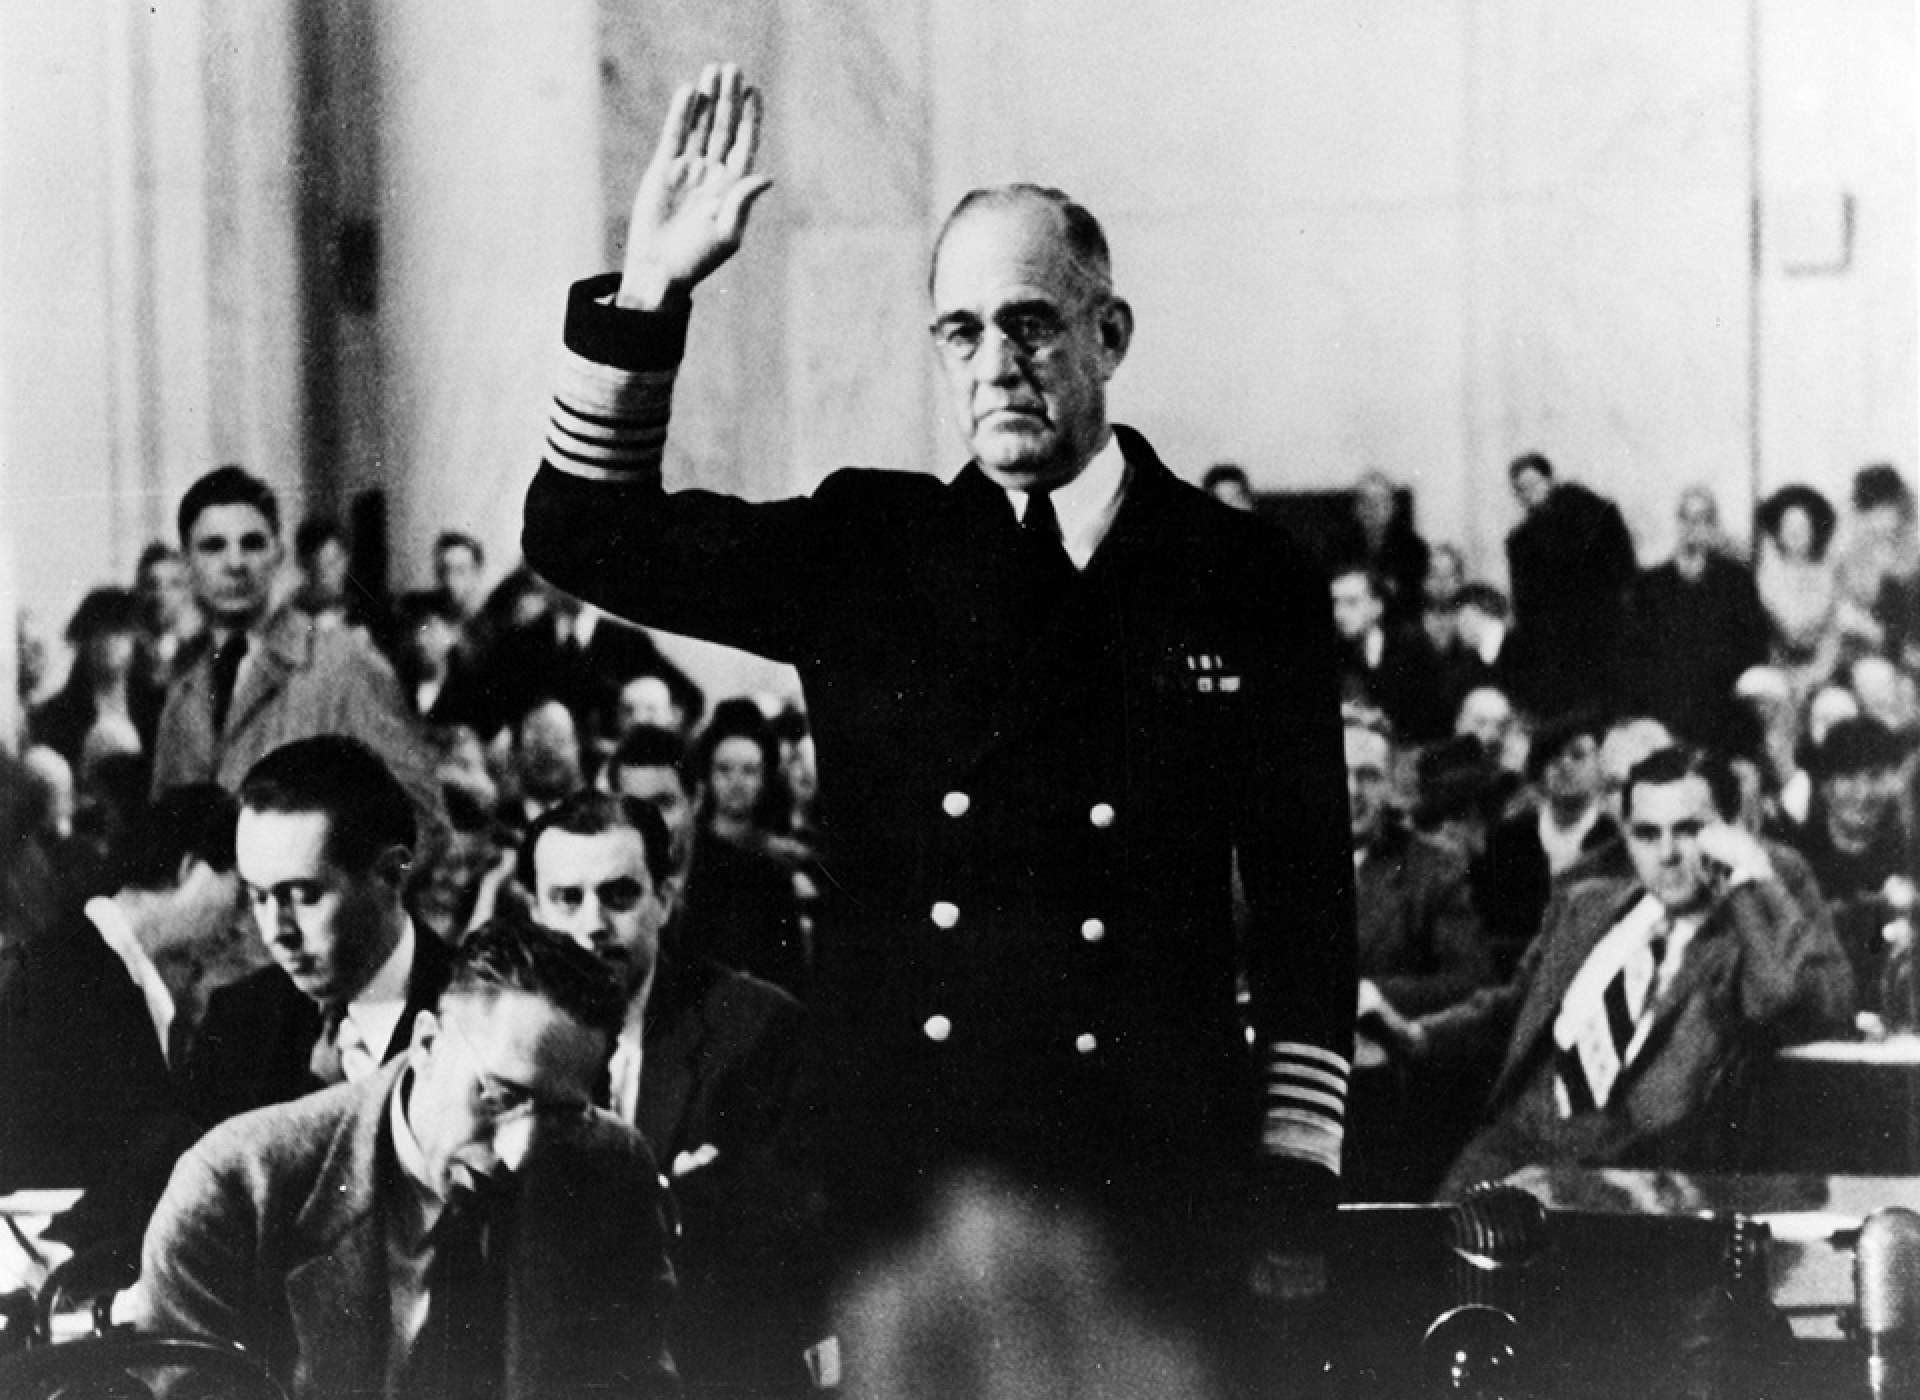 Admiral Richardson takes the oath before testifying during the Congressional investigation into the Japanese attack on Pearl Harbor